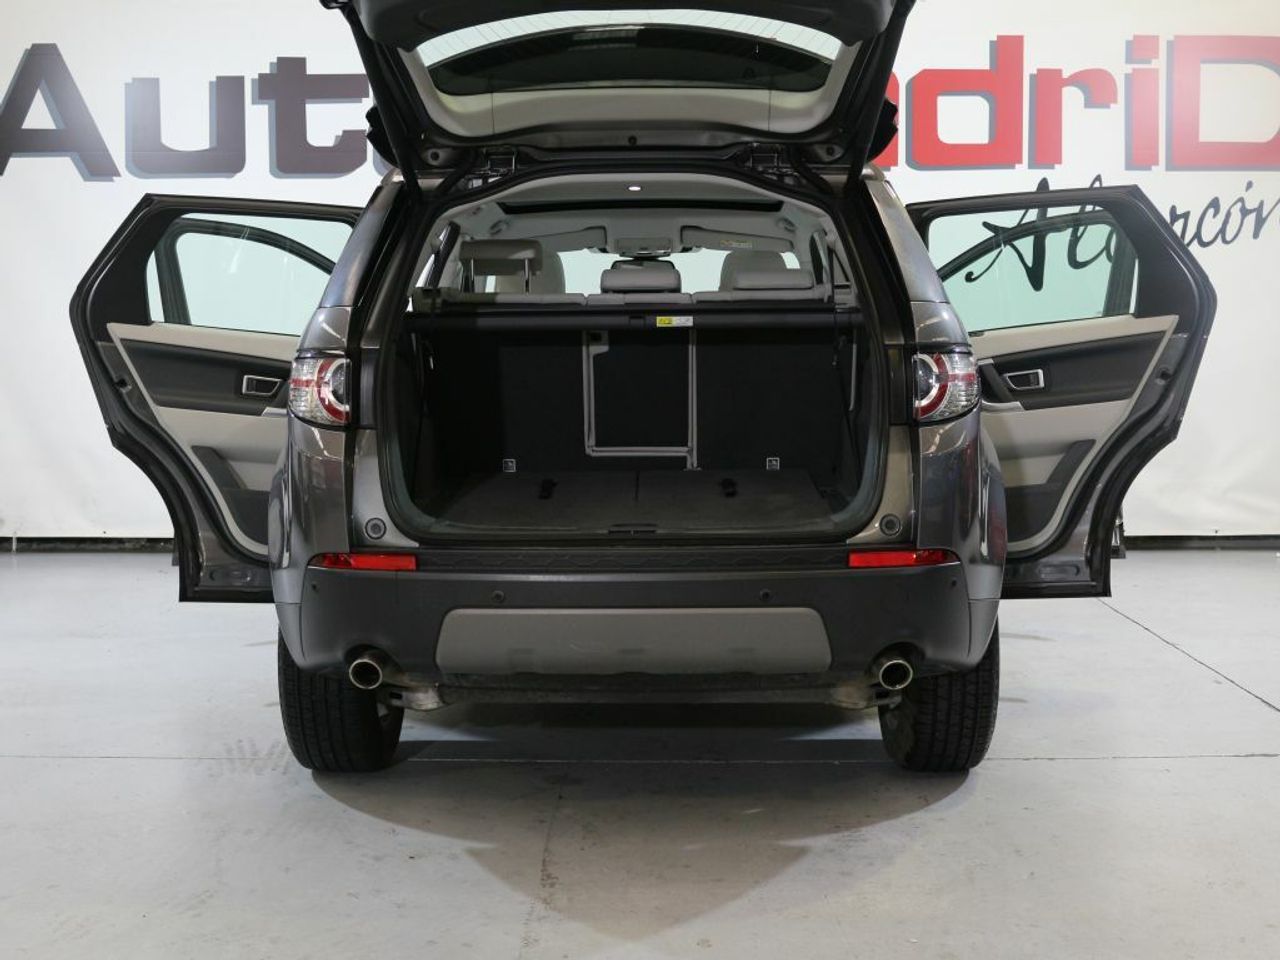 Foto Land-Rover Discovery Sport 5